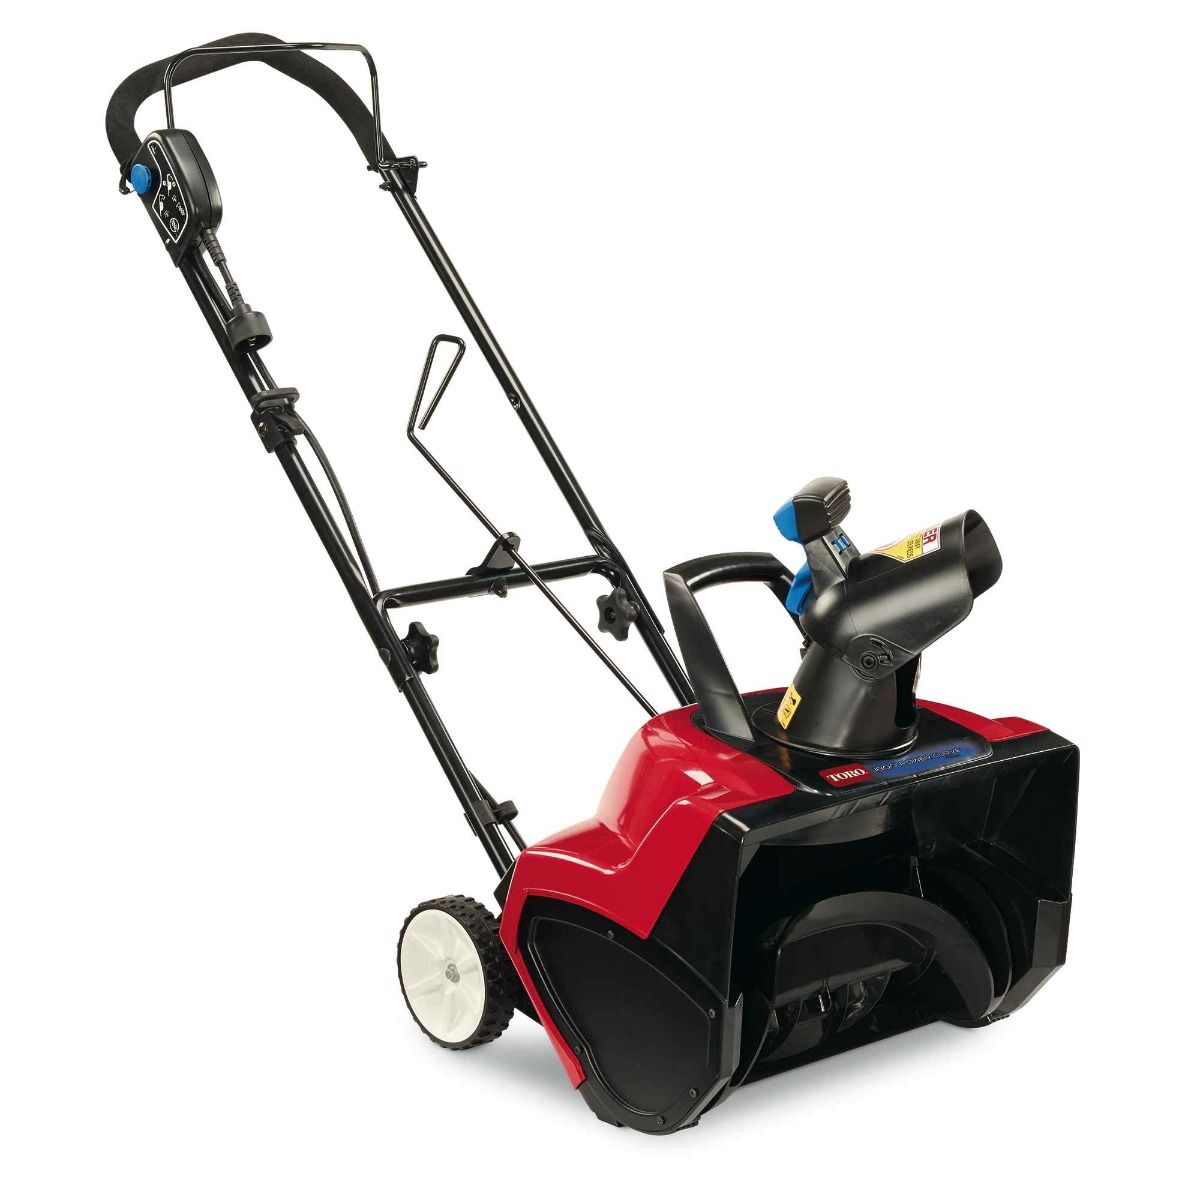 Toro 38381 Electric Snow Thrower 1800 Power Curve 18 inch width